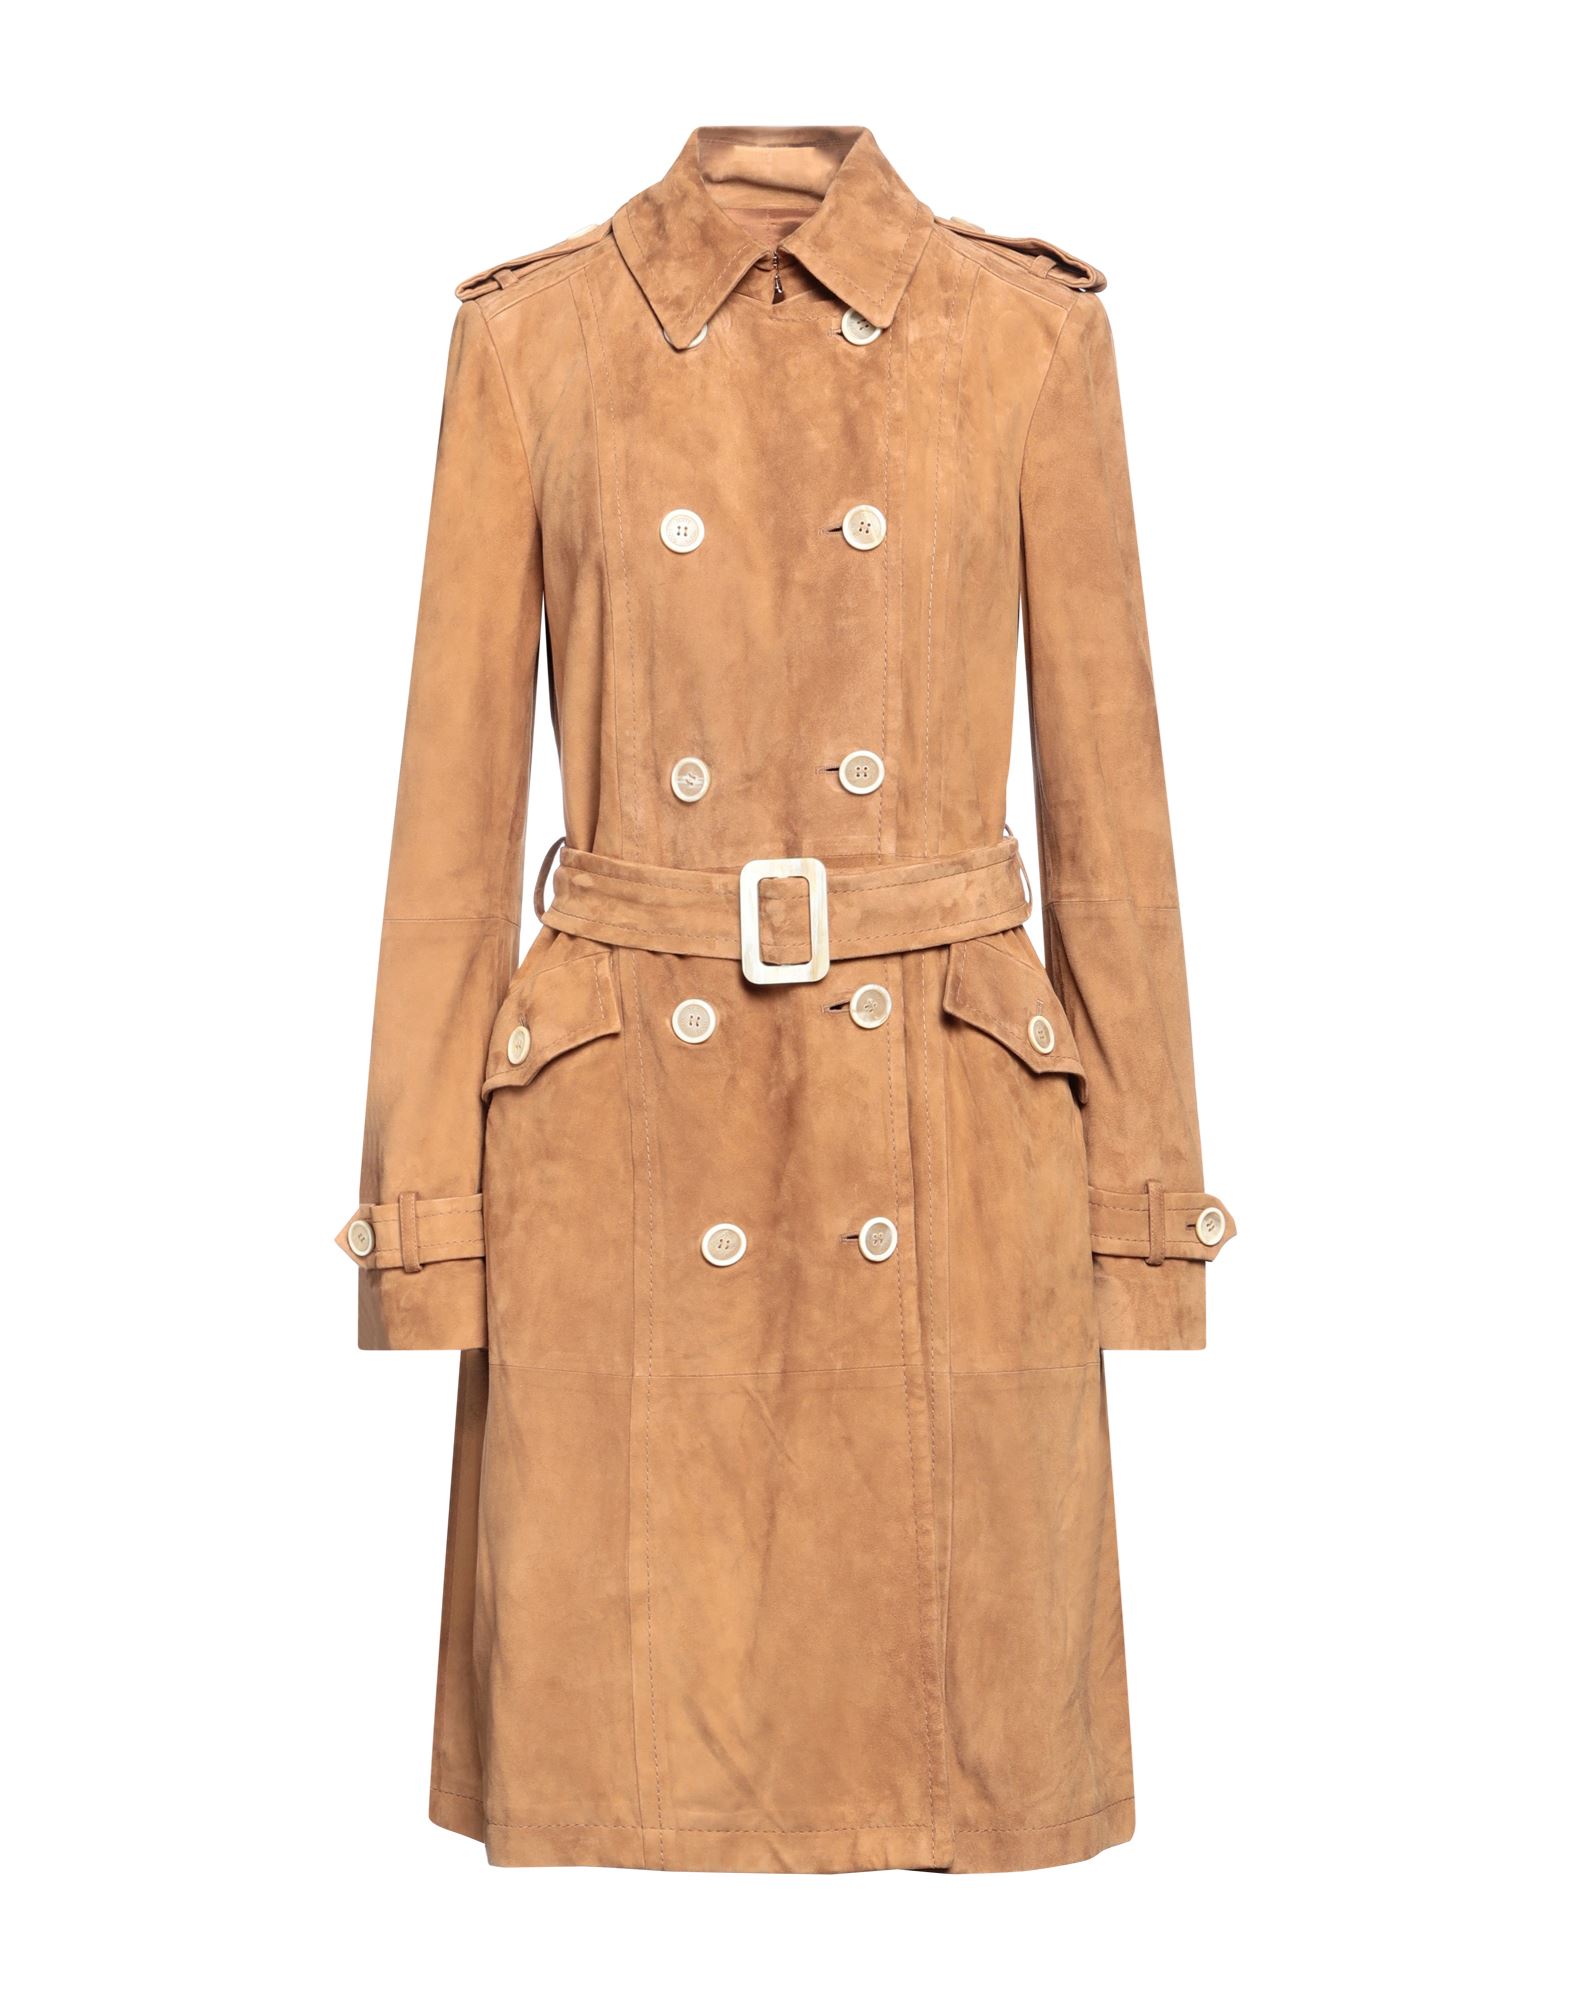 Shop Tod's Woman Overcoat & Trench Coat Camel Size 6 Ovine Leather, Goat Skin In Beige